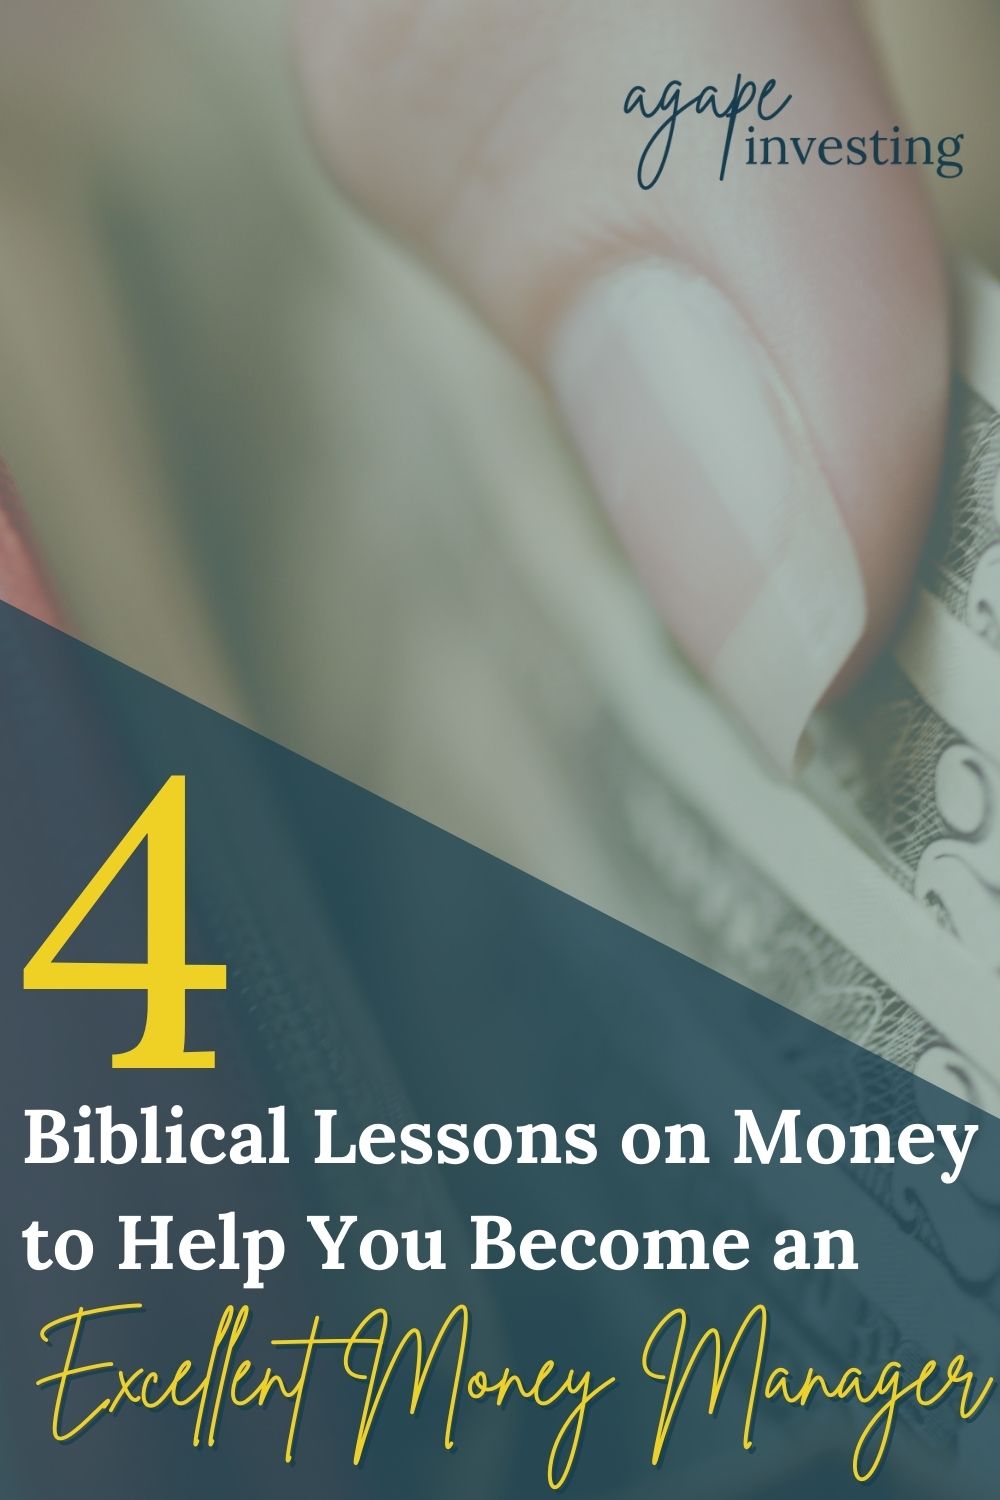 There is a time and a place for learning practical money tips from the Bible, but in this article we are going to go over 4 biblical lessons on money that I believe are important to know as you learn to become an excellent money manager.